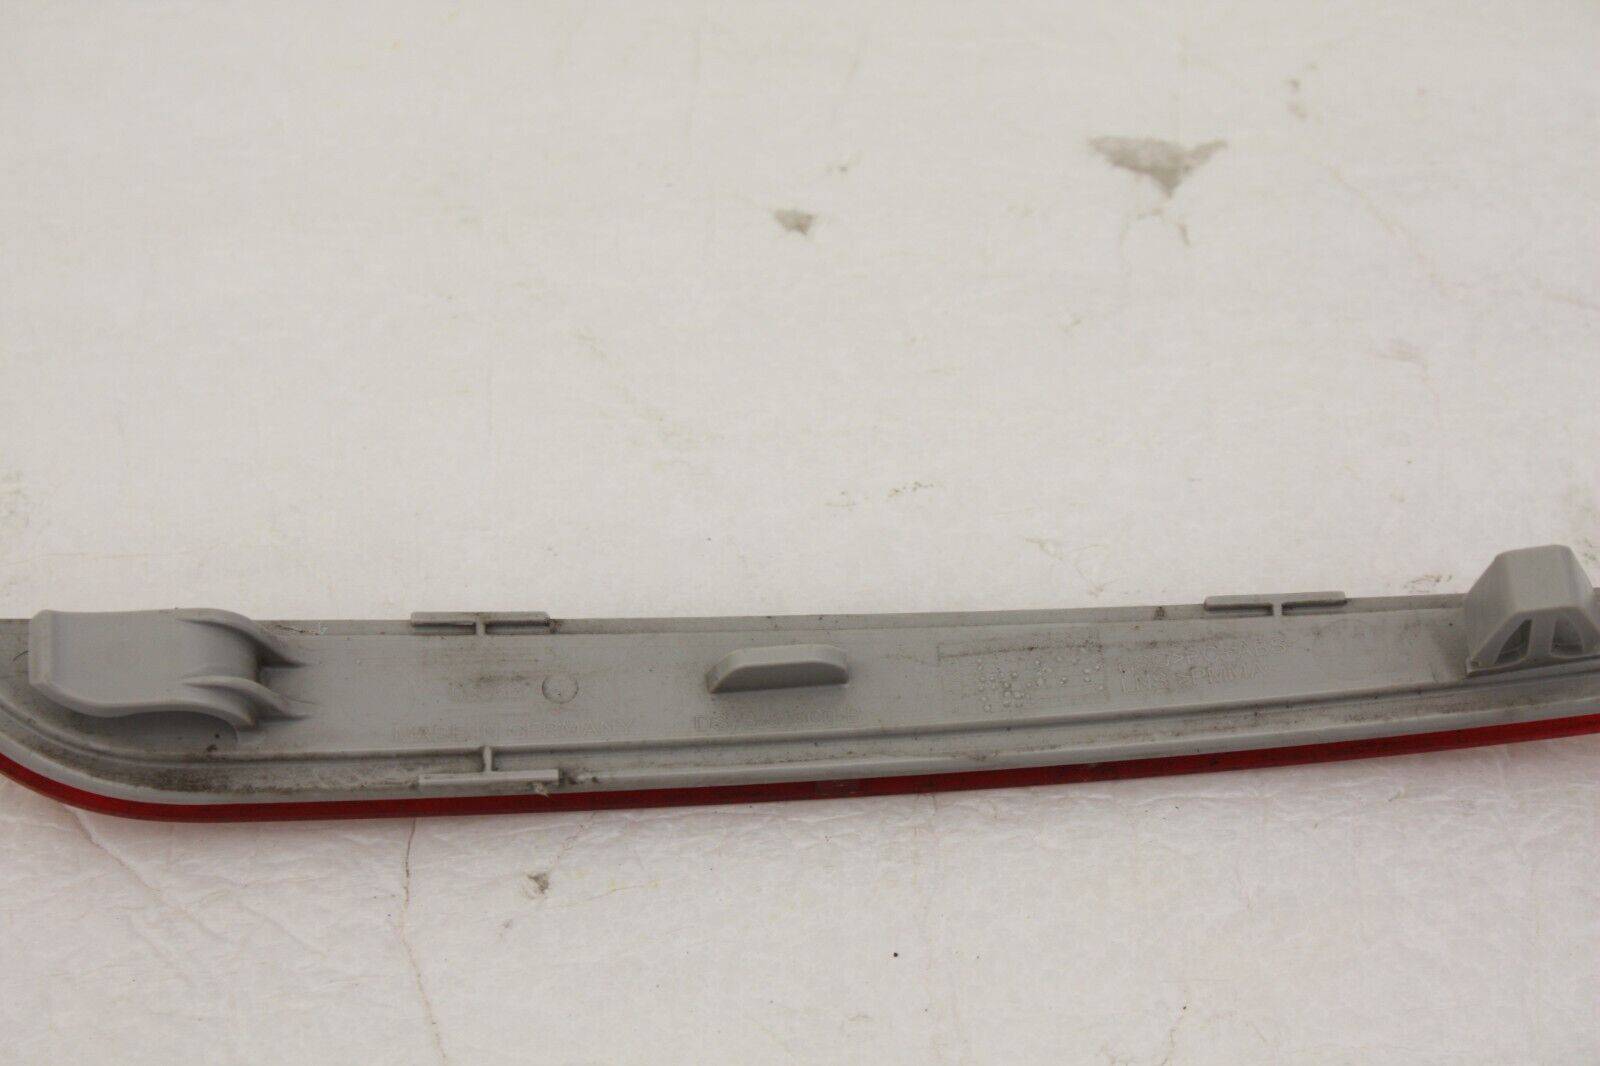 Ford-Mondeo-Rear-Bumper-Left-Side-Reflector-2015-TO-2019-DS73-515C0-B-Genuine-176398797928-7